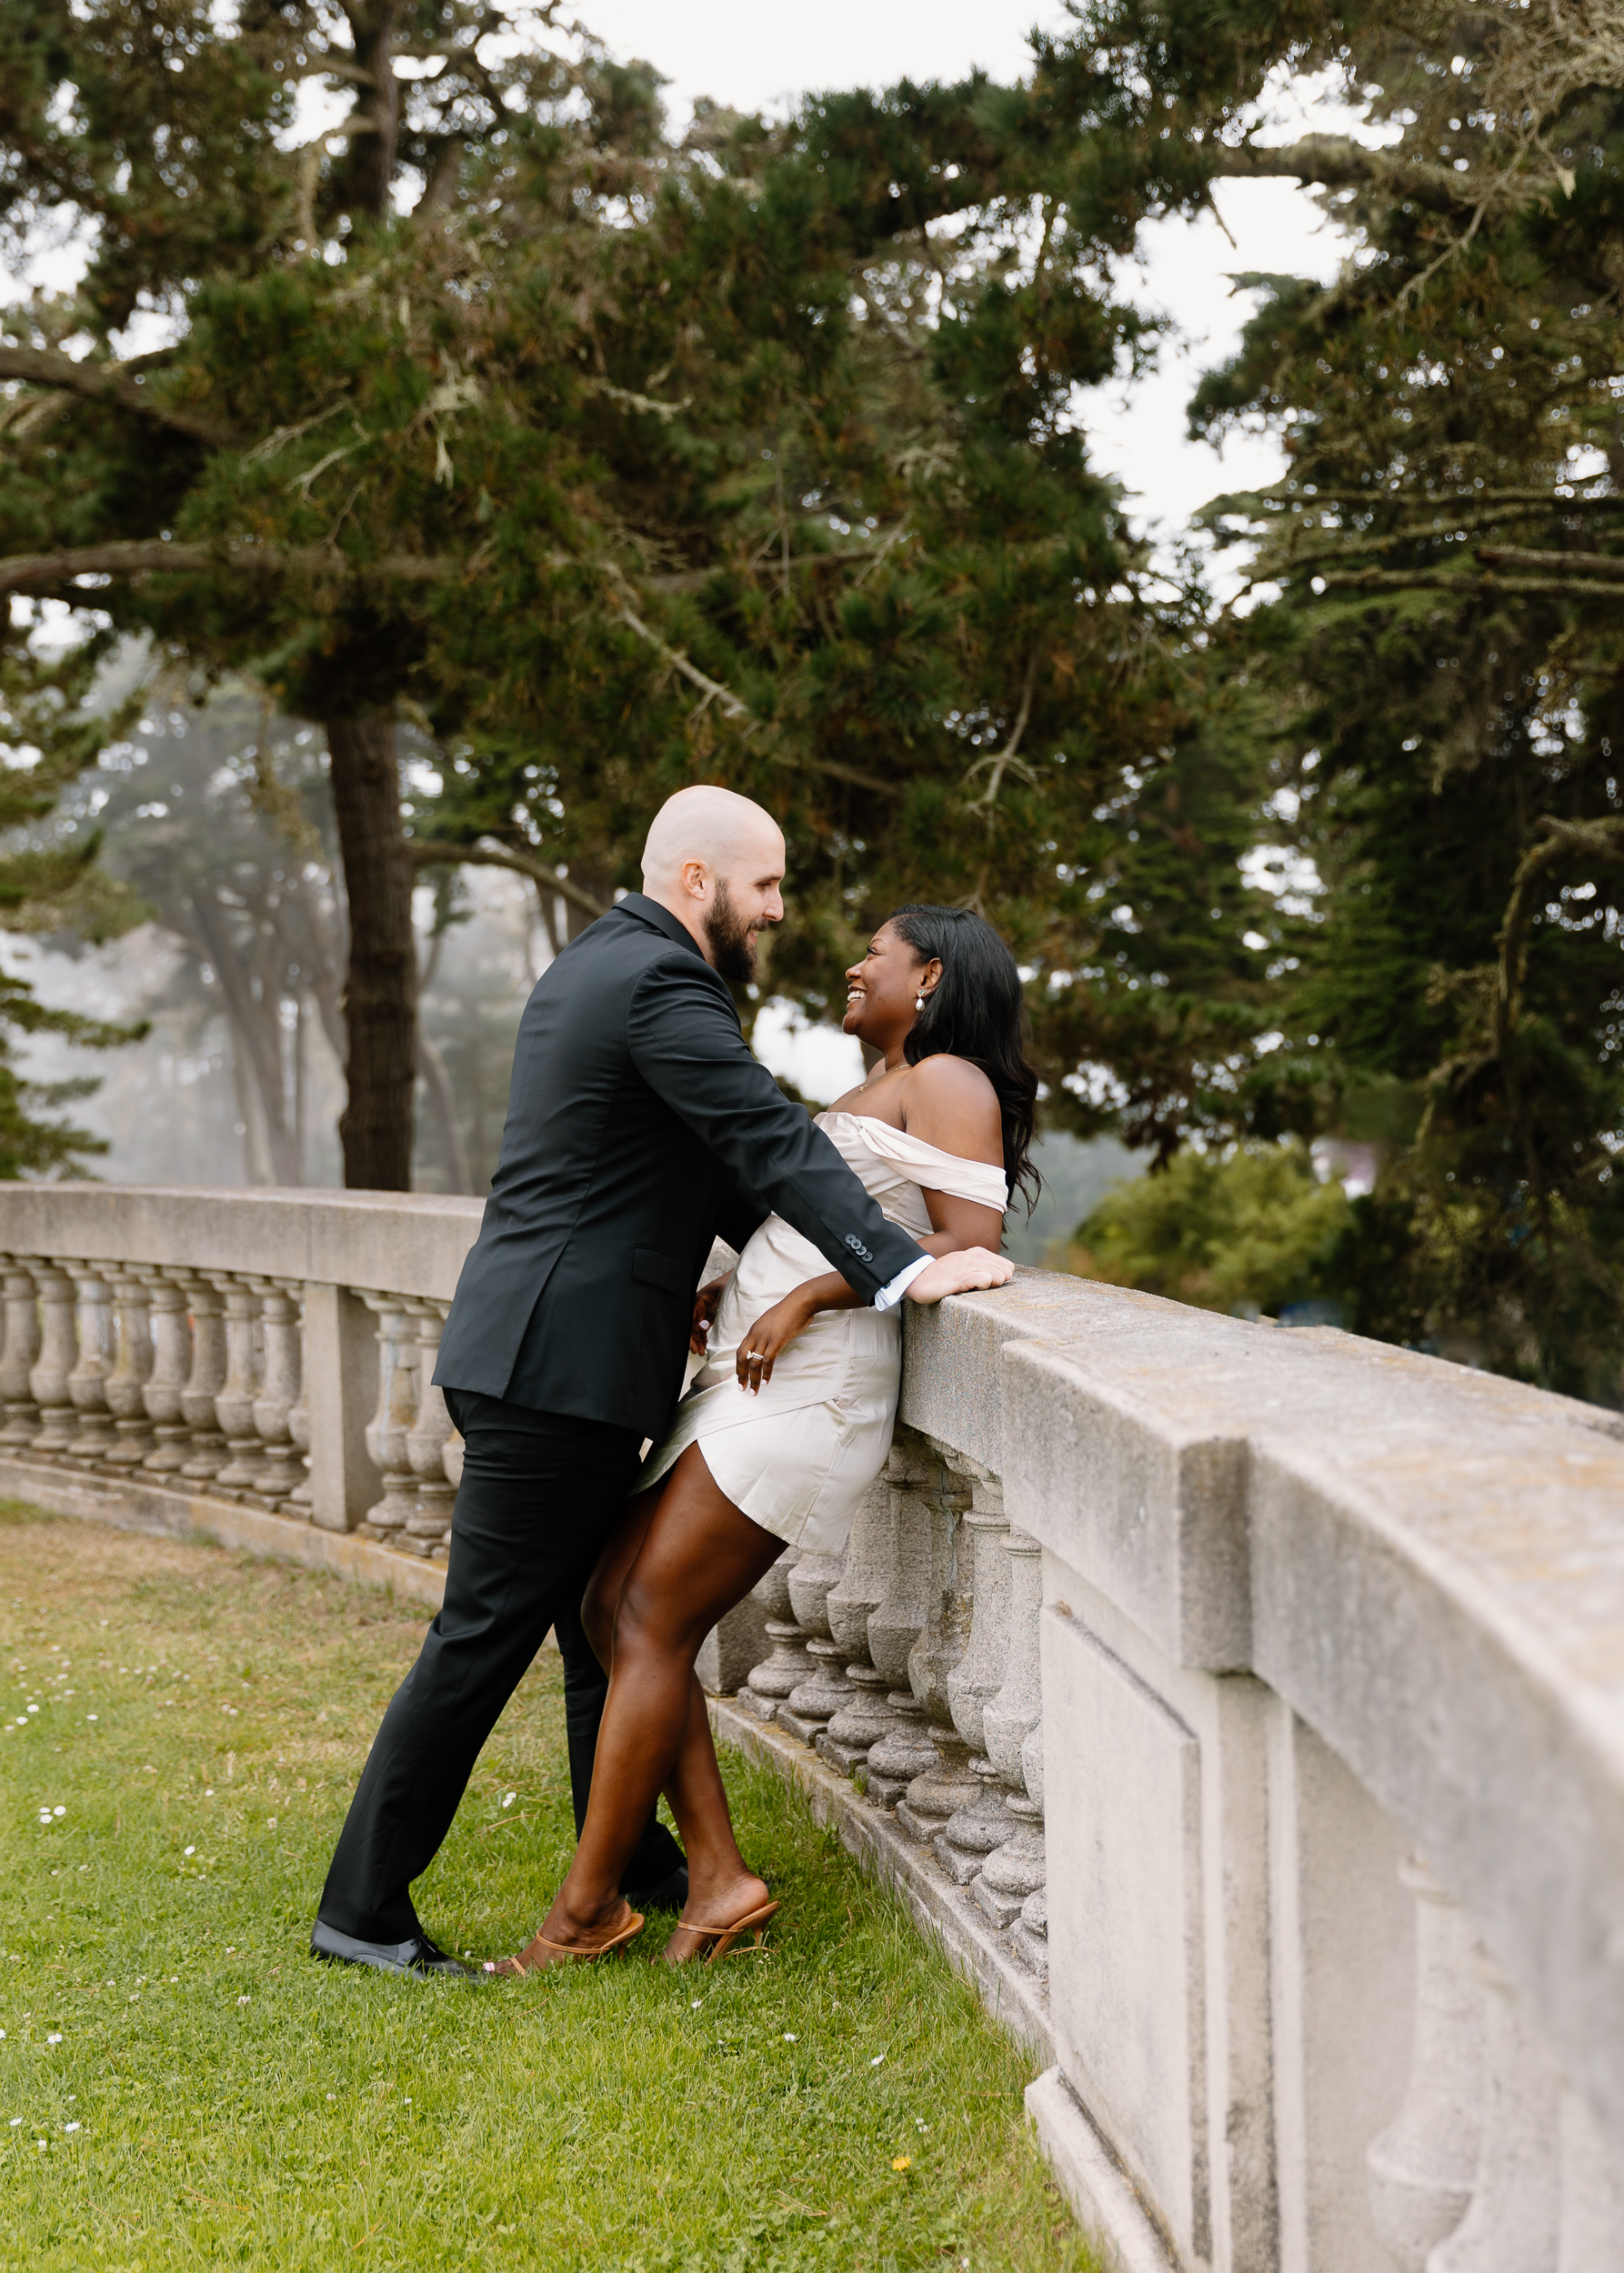 A shot of the couple framed against a fog-draped sculpture, capturing the blend of nature, art, and love at the Legion of Honor.